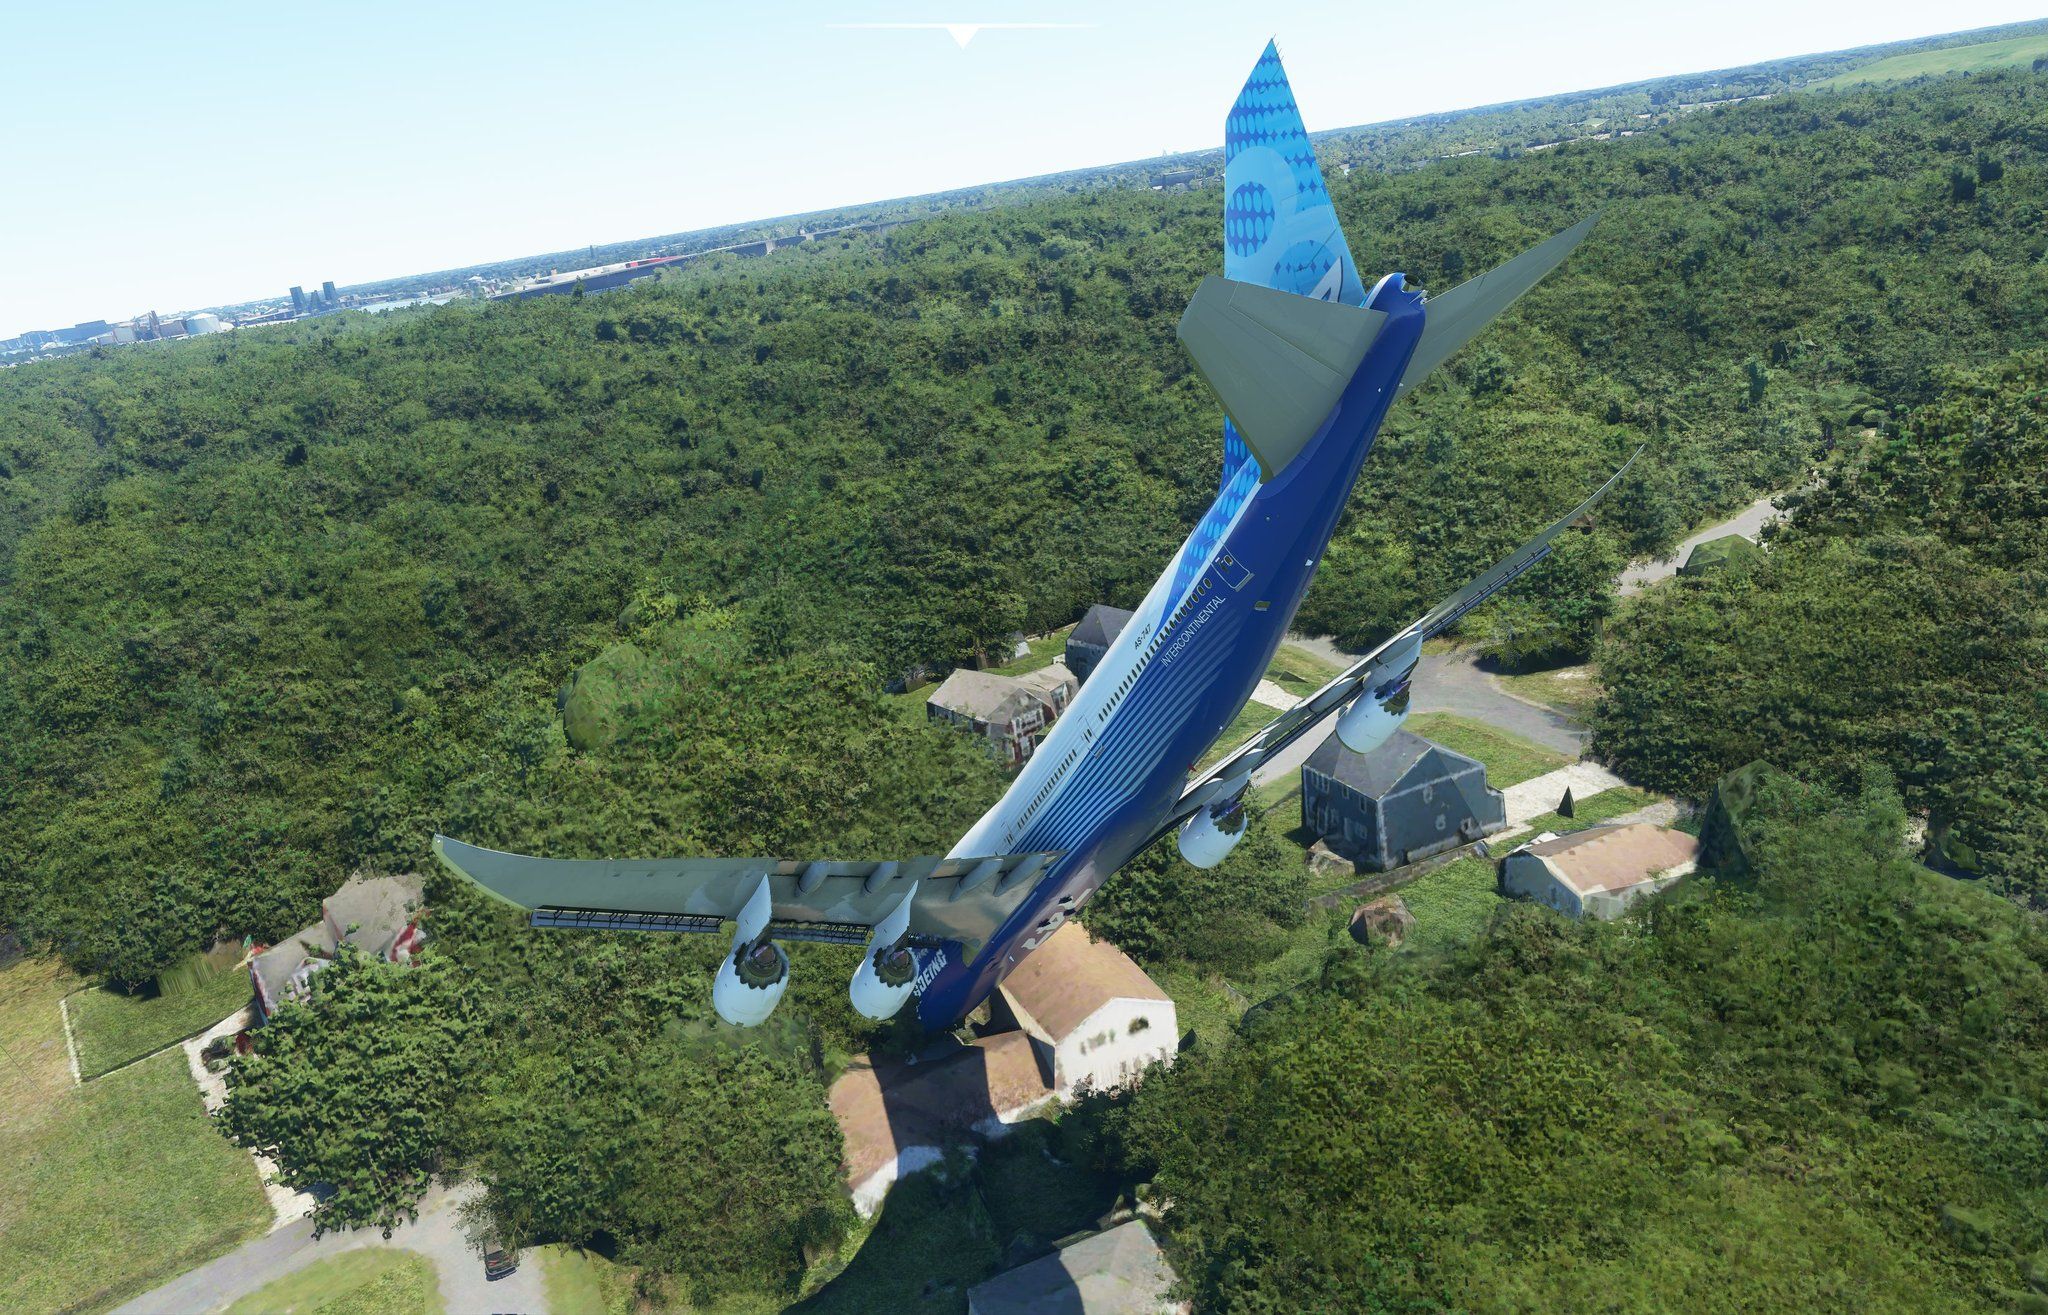 Real cyberbullying is crashing your plane into someone's house in Microsoft Flight Simulator and sending them the pic